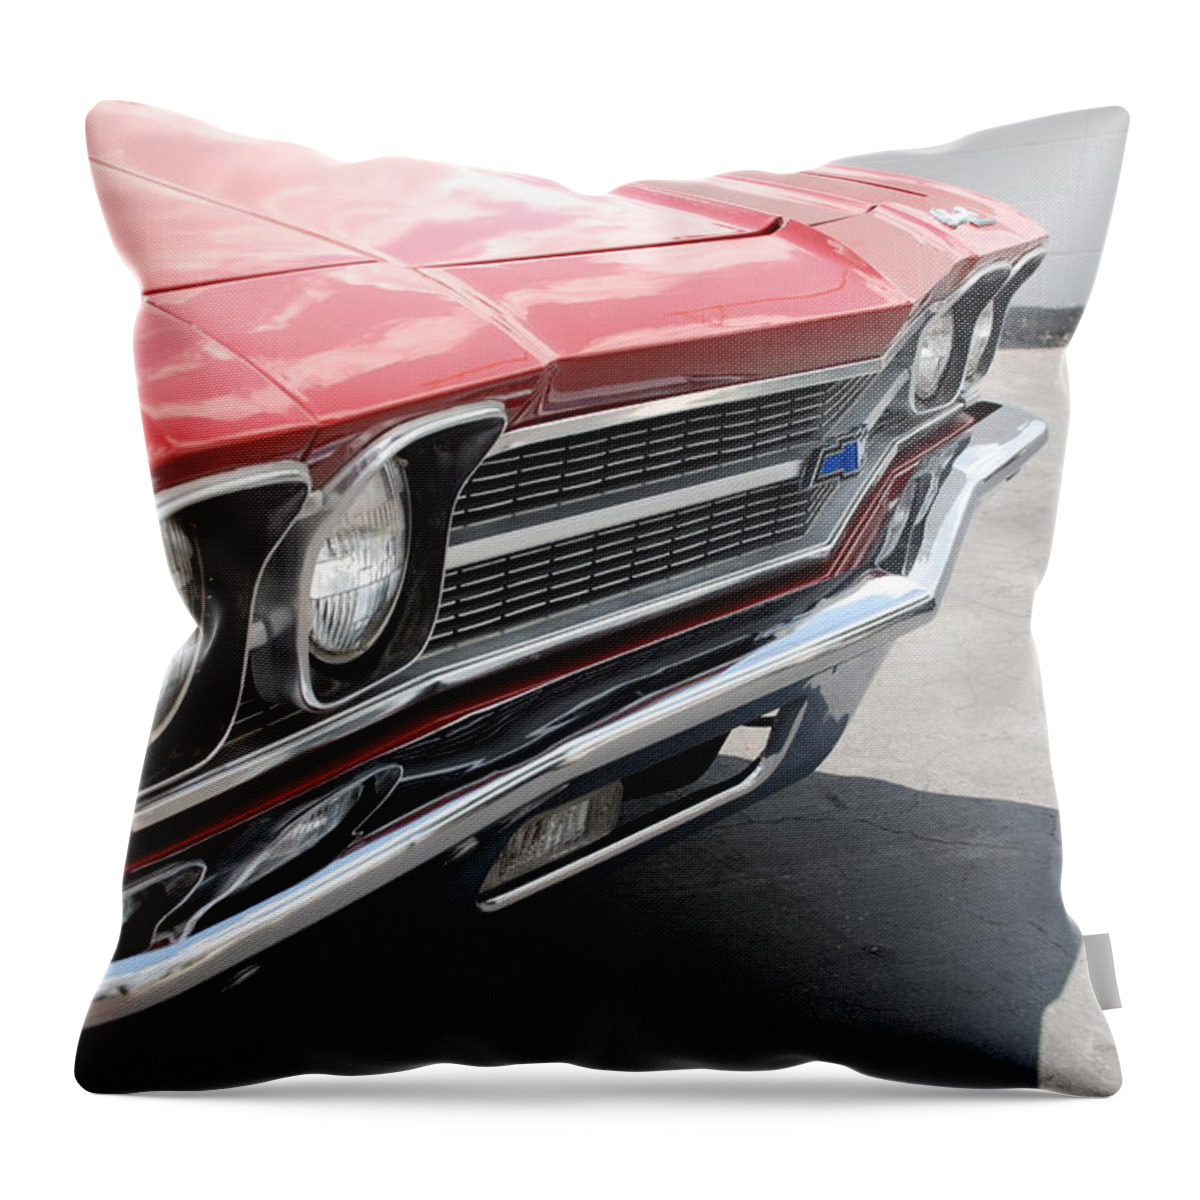 Chevy Throw Pillow featuring the photograph Cherry Chevelle #2 by Rob Hans